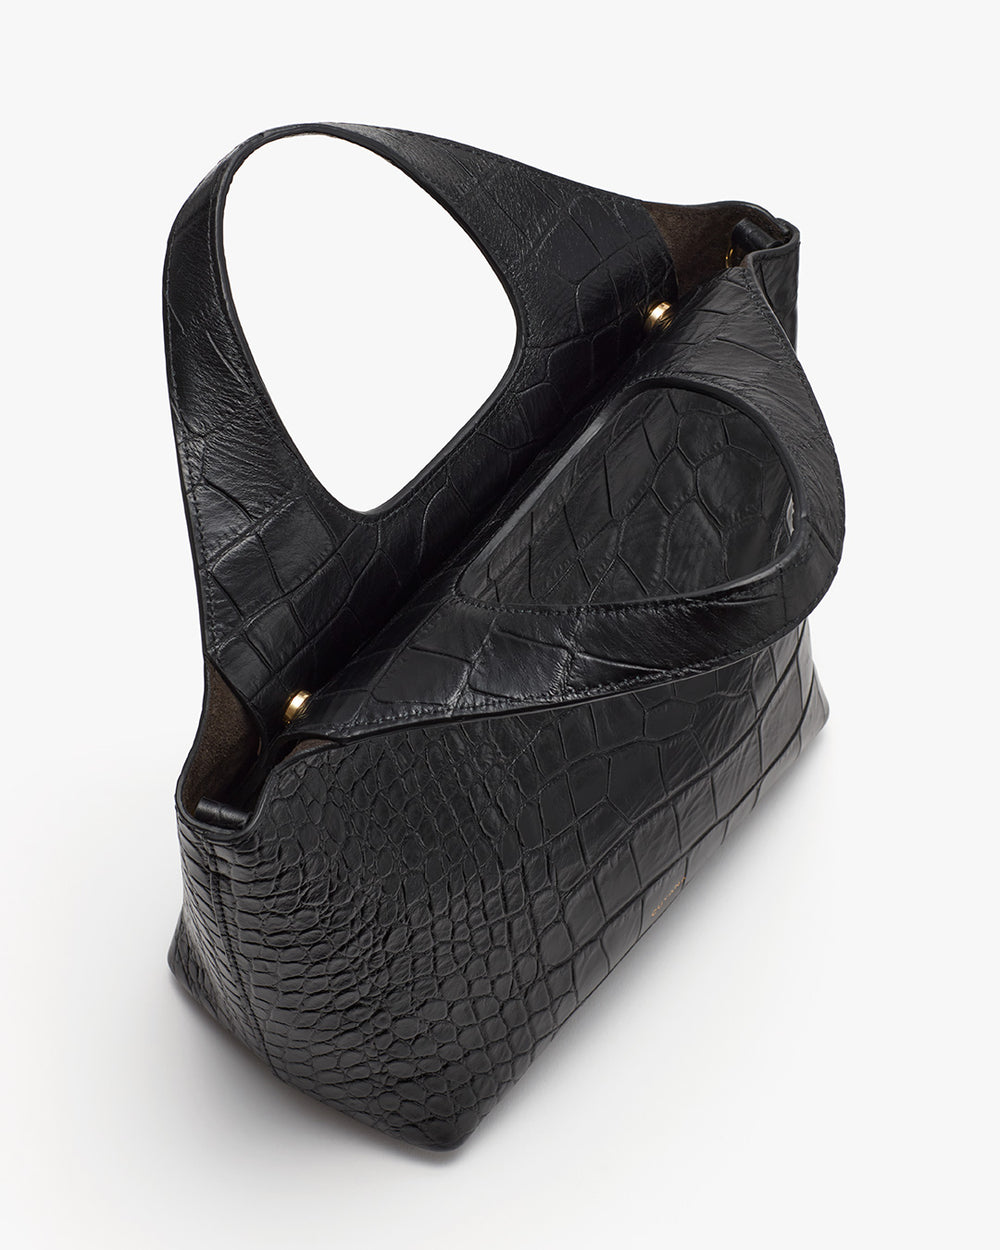 Handbag on a plain background with a single strap and textured surface.